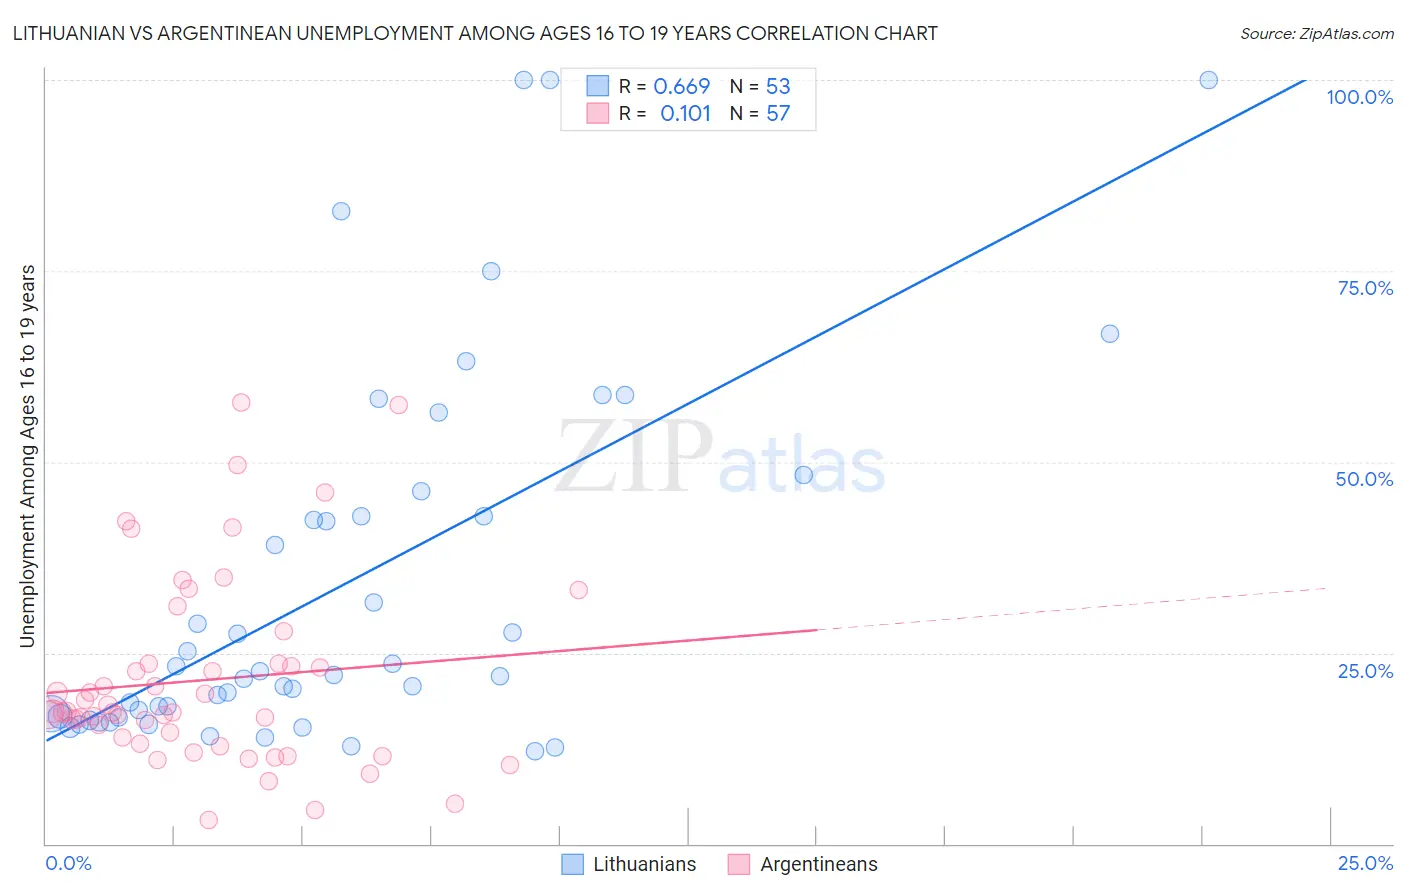 Lithuanian vs Argentinean Unemployment Among Ages 16 to 19 years